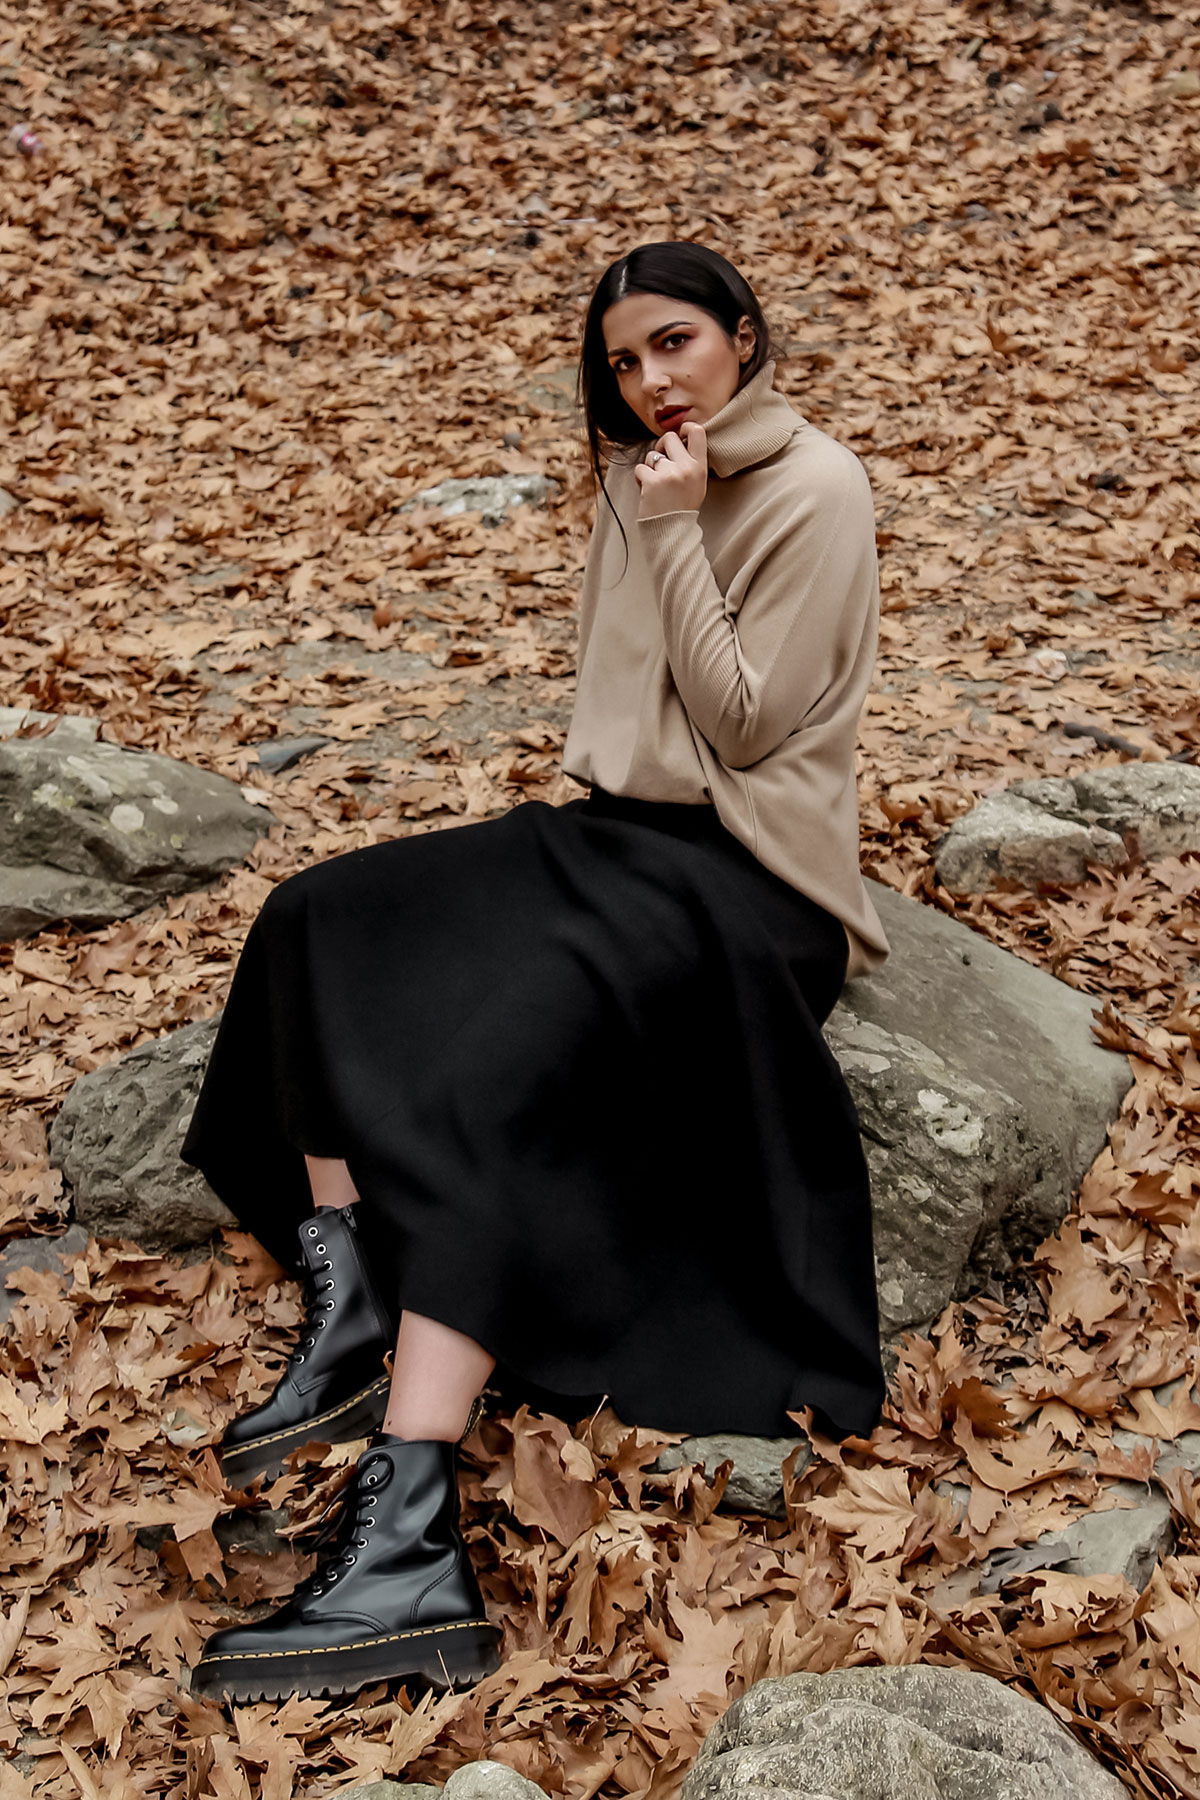 favourite fall wardrobe staples by Stella Asteria - wearing turtleneck sweater with knit skirt and Dr Martens boots